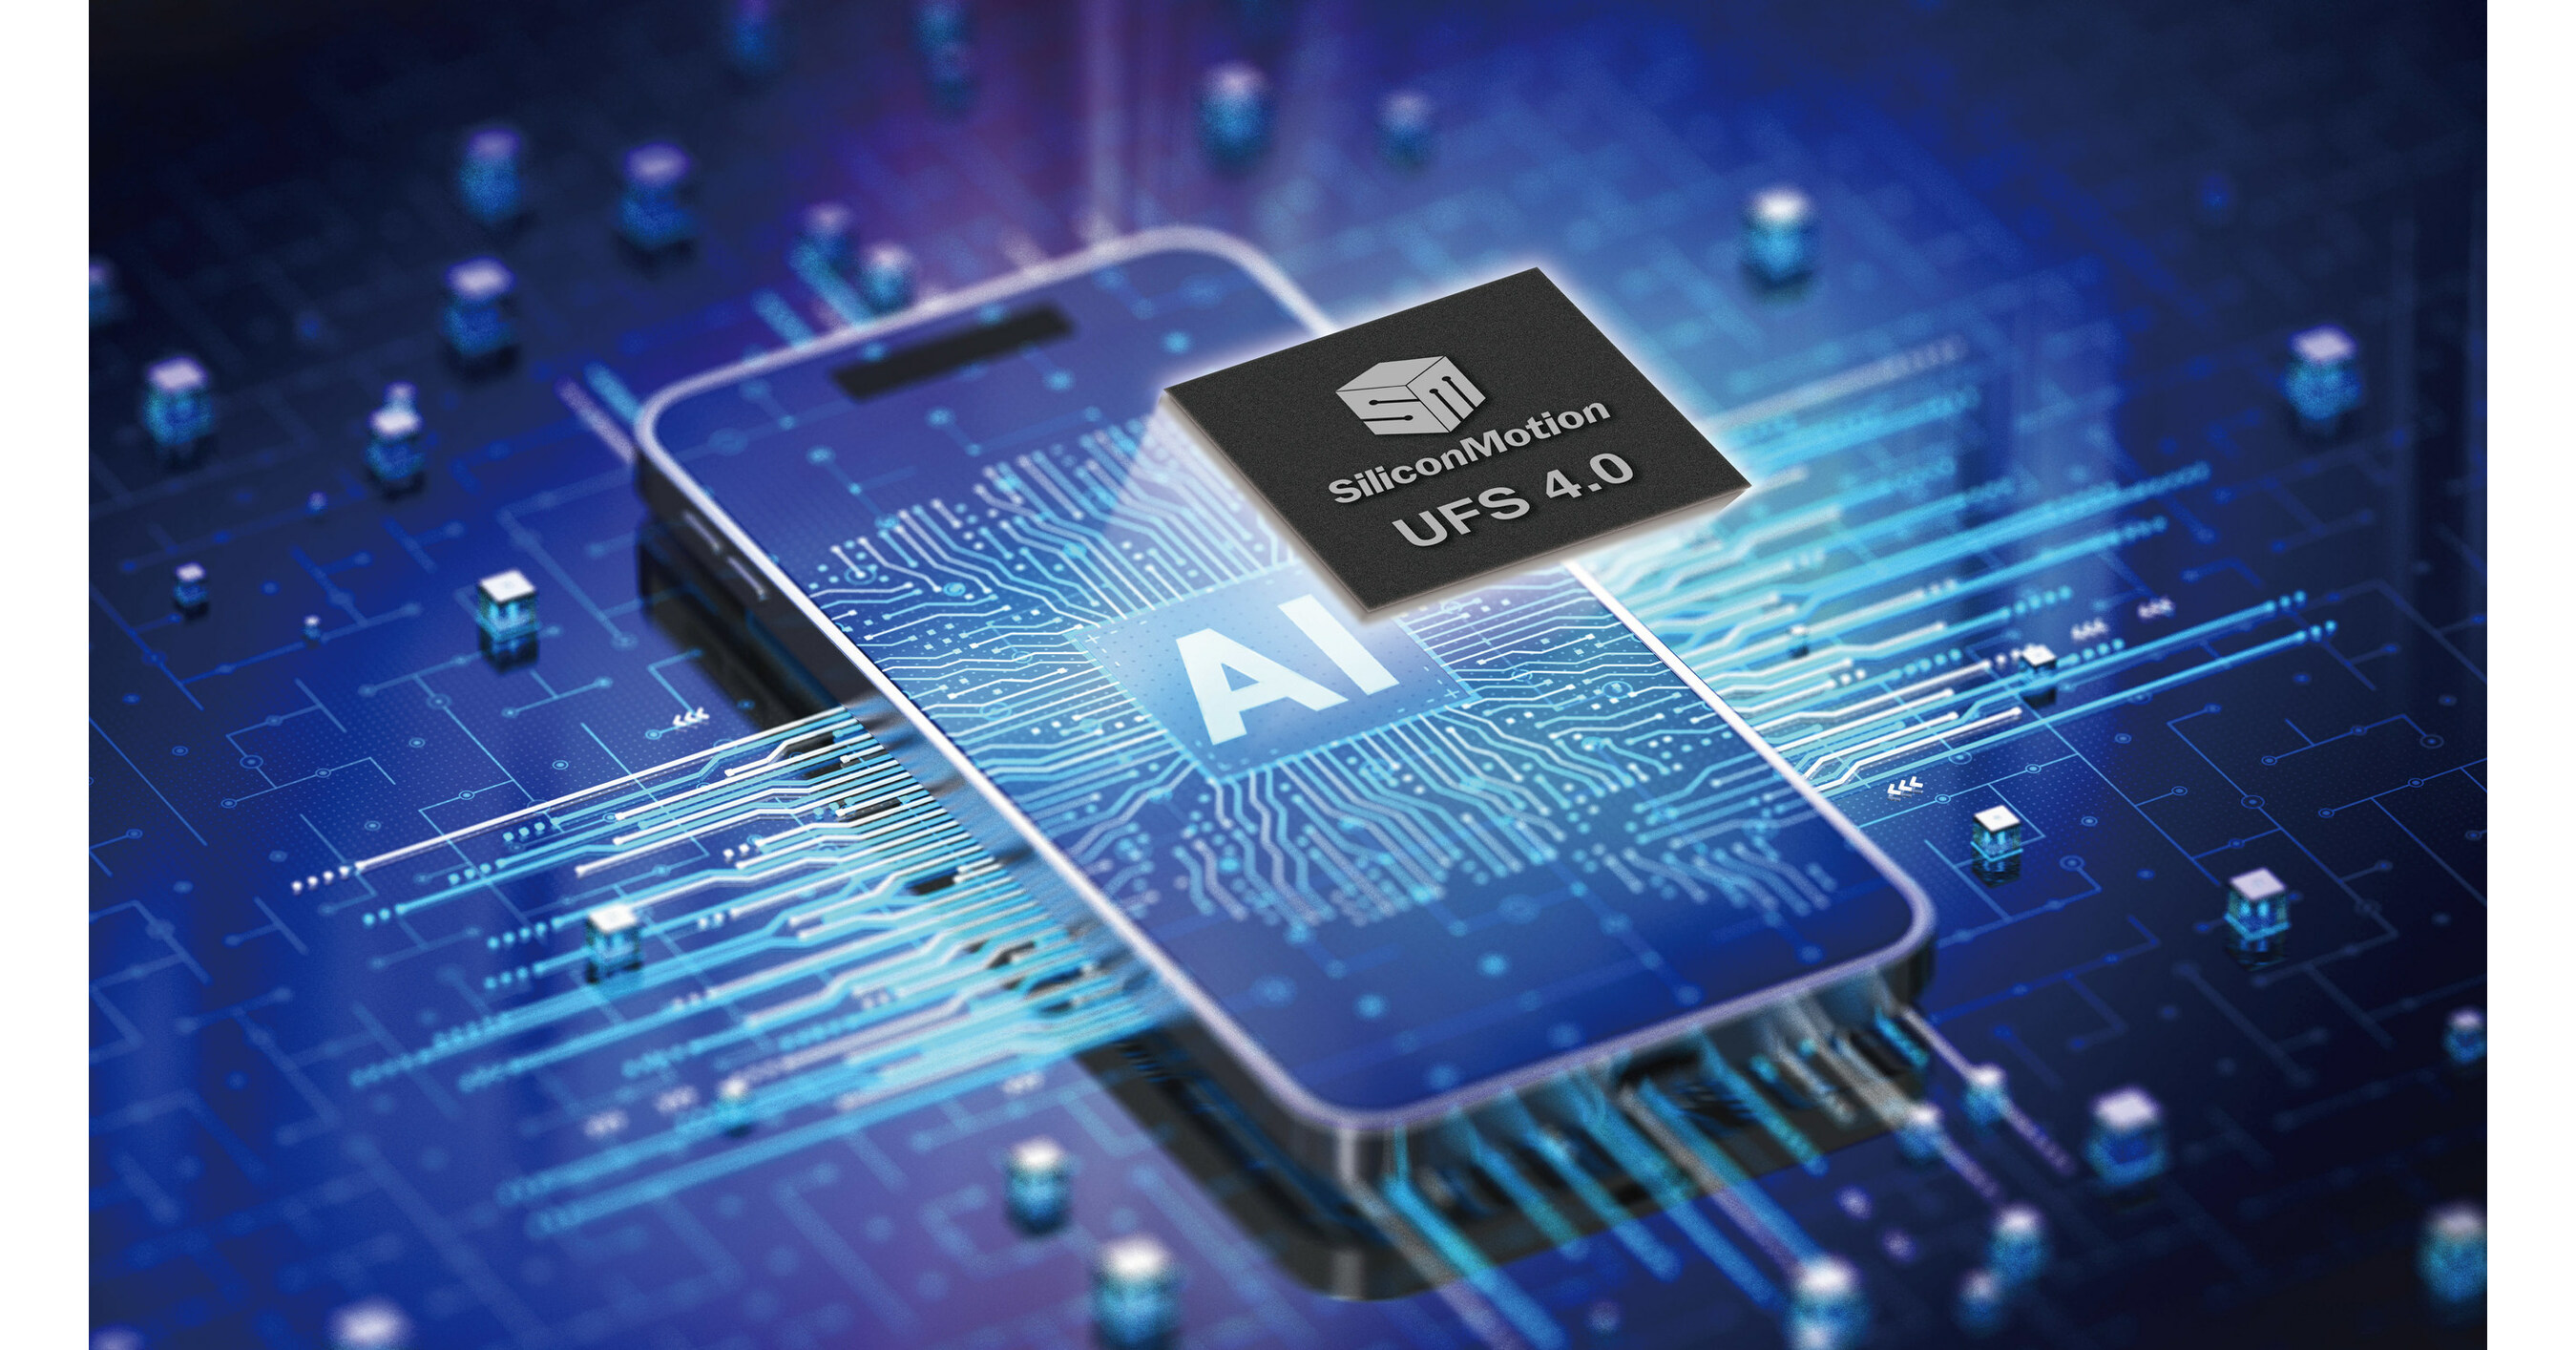 Silicon Motion Unveils 6nm UFS 4.0 Controller for AI Smartphones, Edge Computing and Automotive Applications